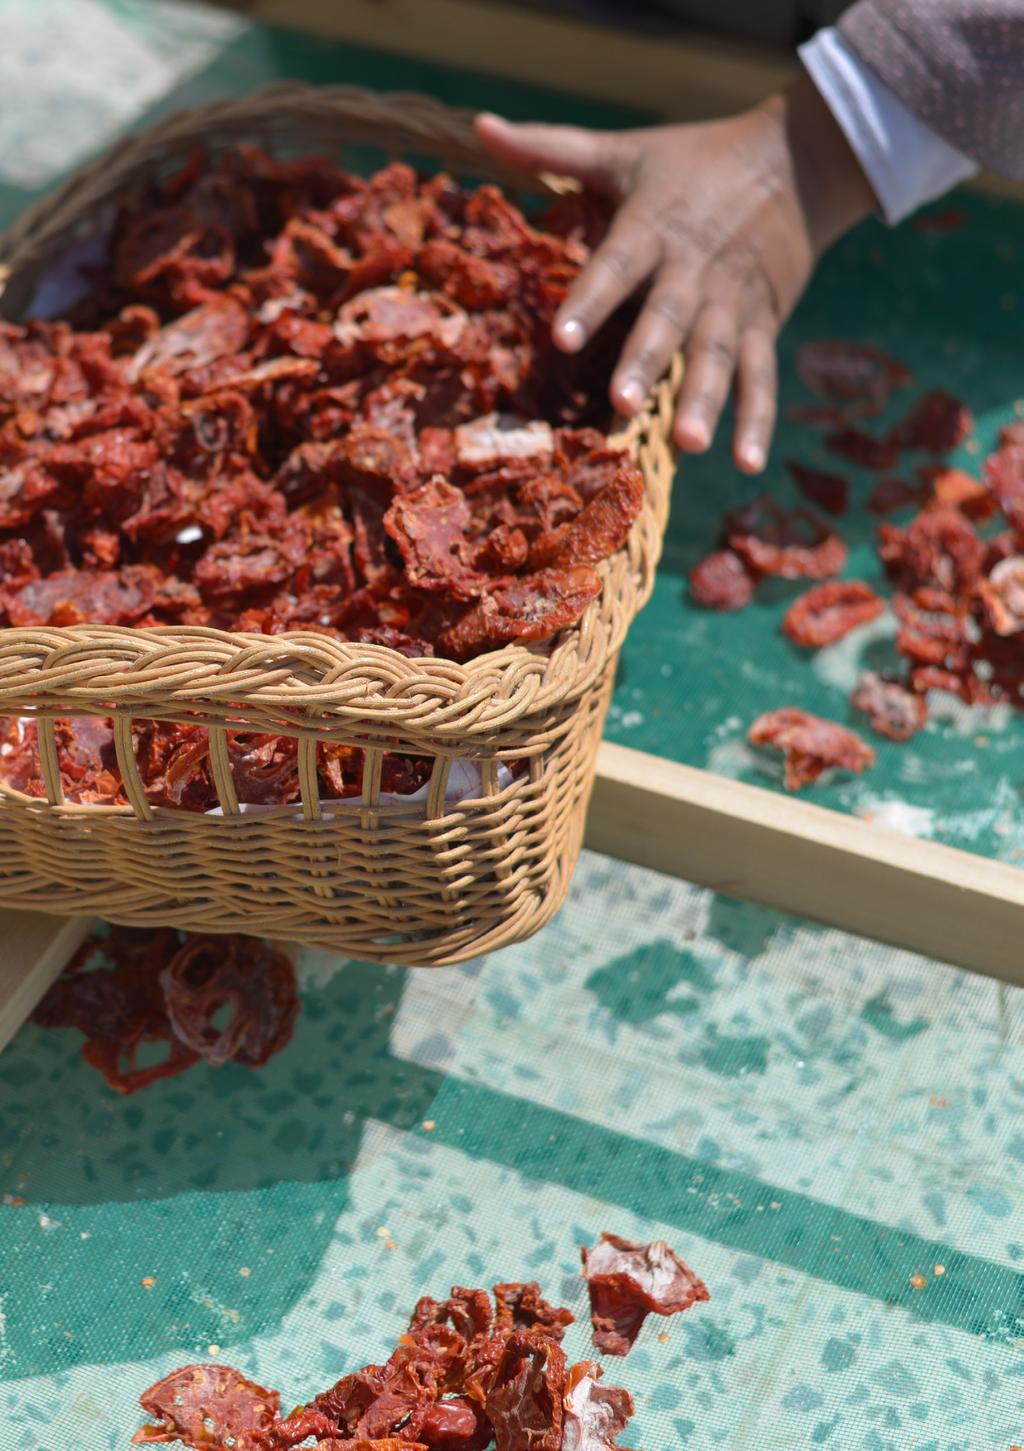 Dried tomatoes can be preserved in either vinegar and olive oil (1:1 ratio), or in freezer bags in a temperature of 18-22 celcius. يمكن حفظ البندورة المجففة في الخل وزيت الزيتون 1.